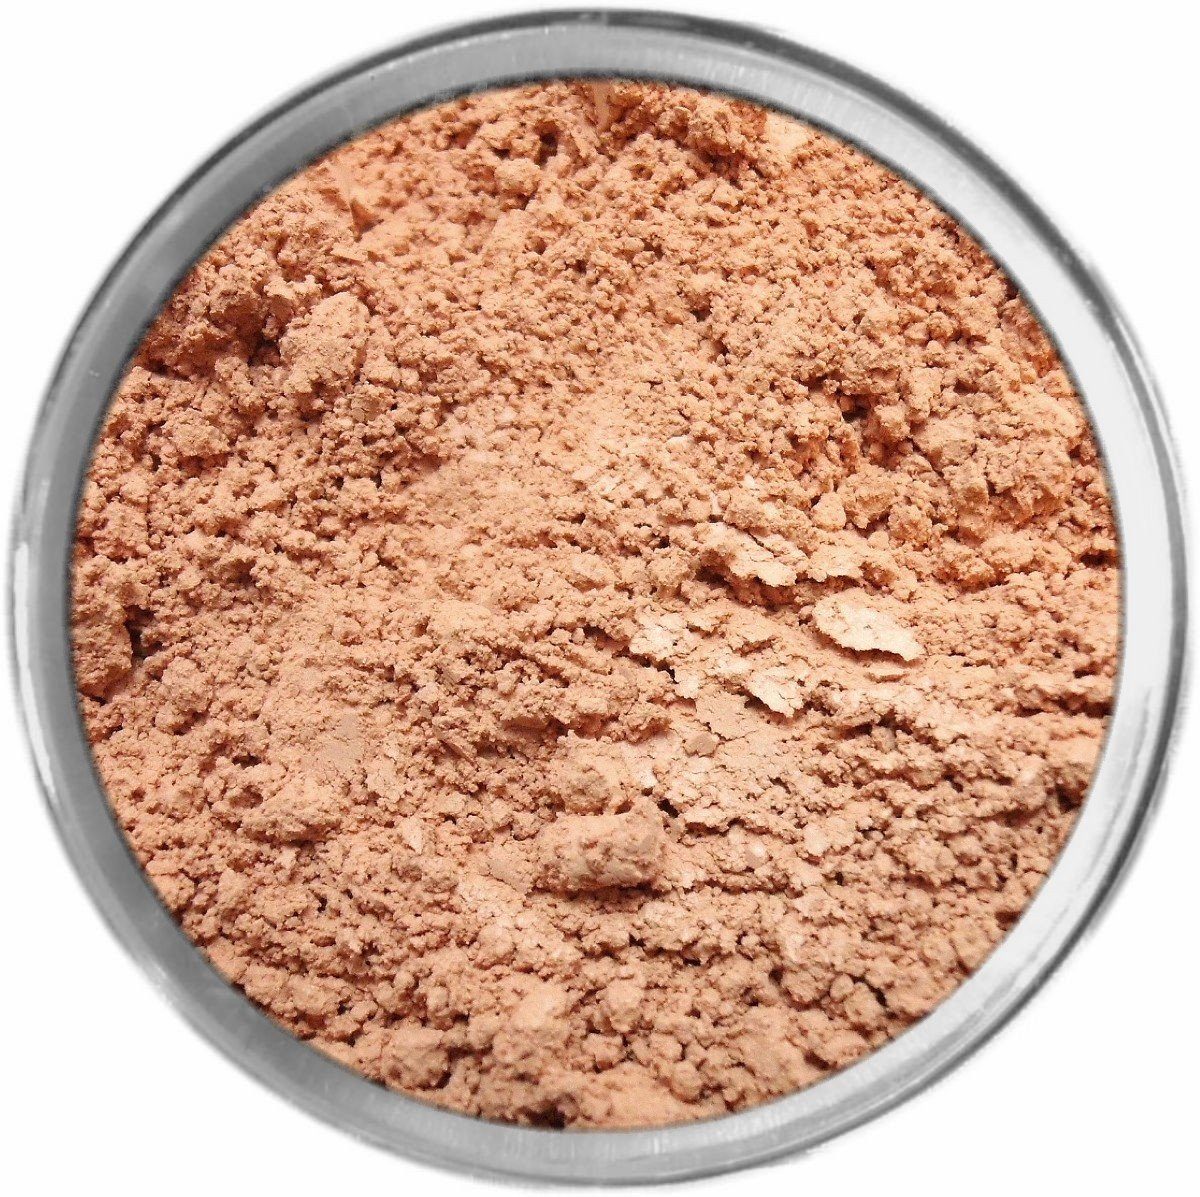 NAKED Multi-Use Loose Mineral Powder Pigment Color Loose Mineral Multi-Use Colors M*A*D Minerals Makeup 